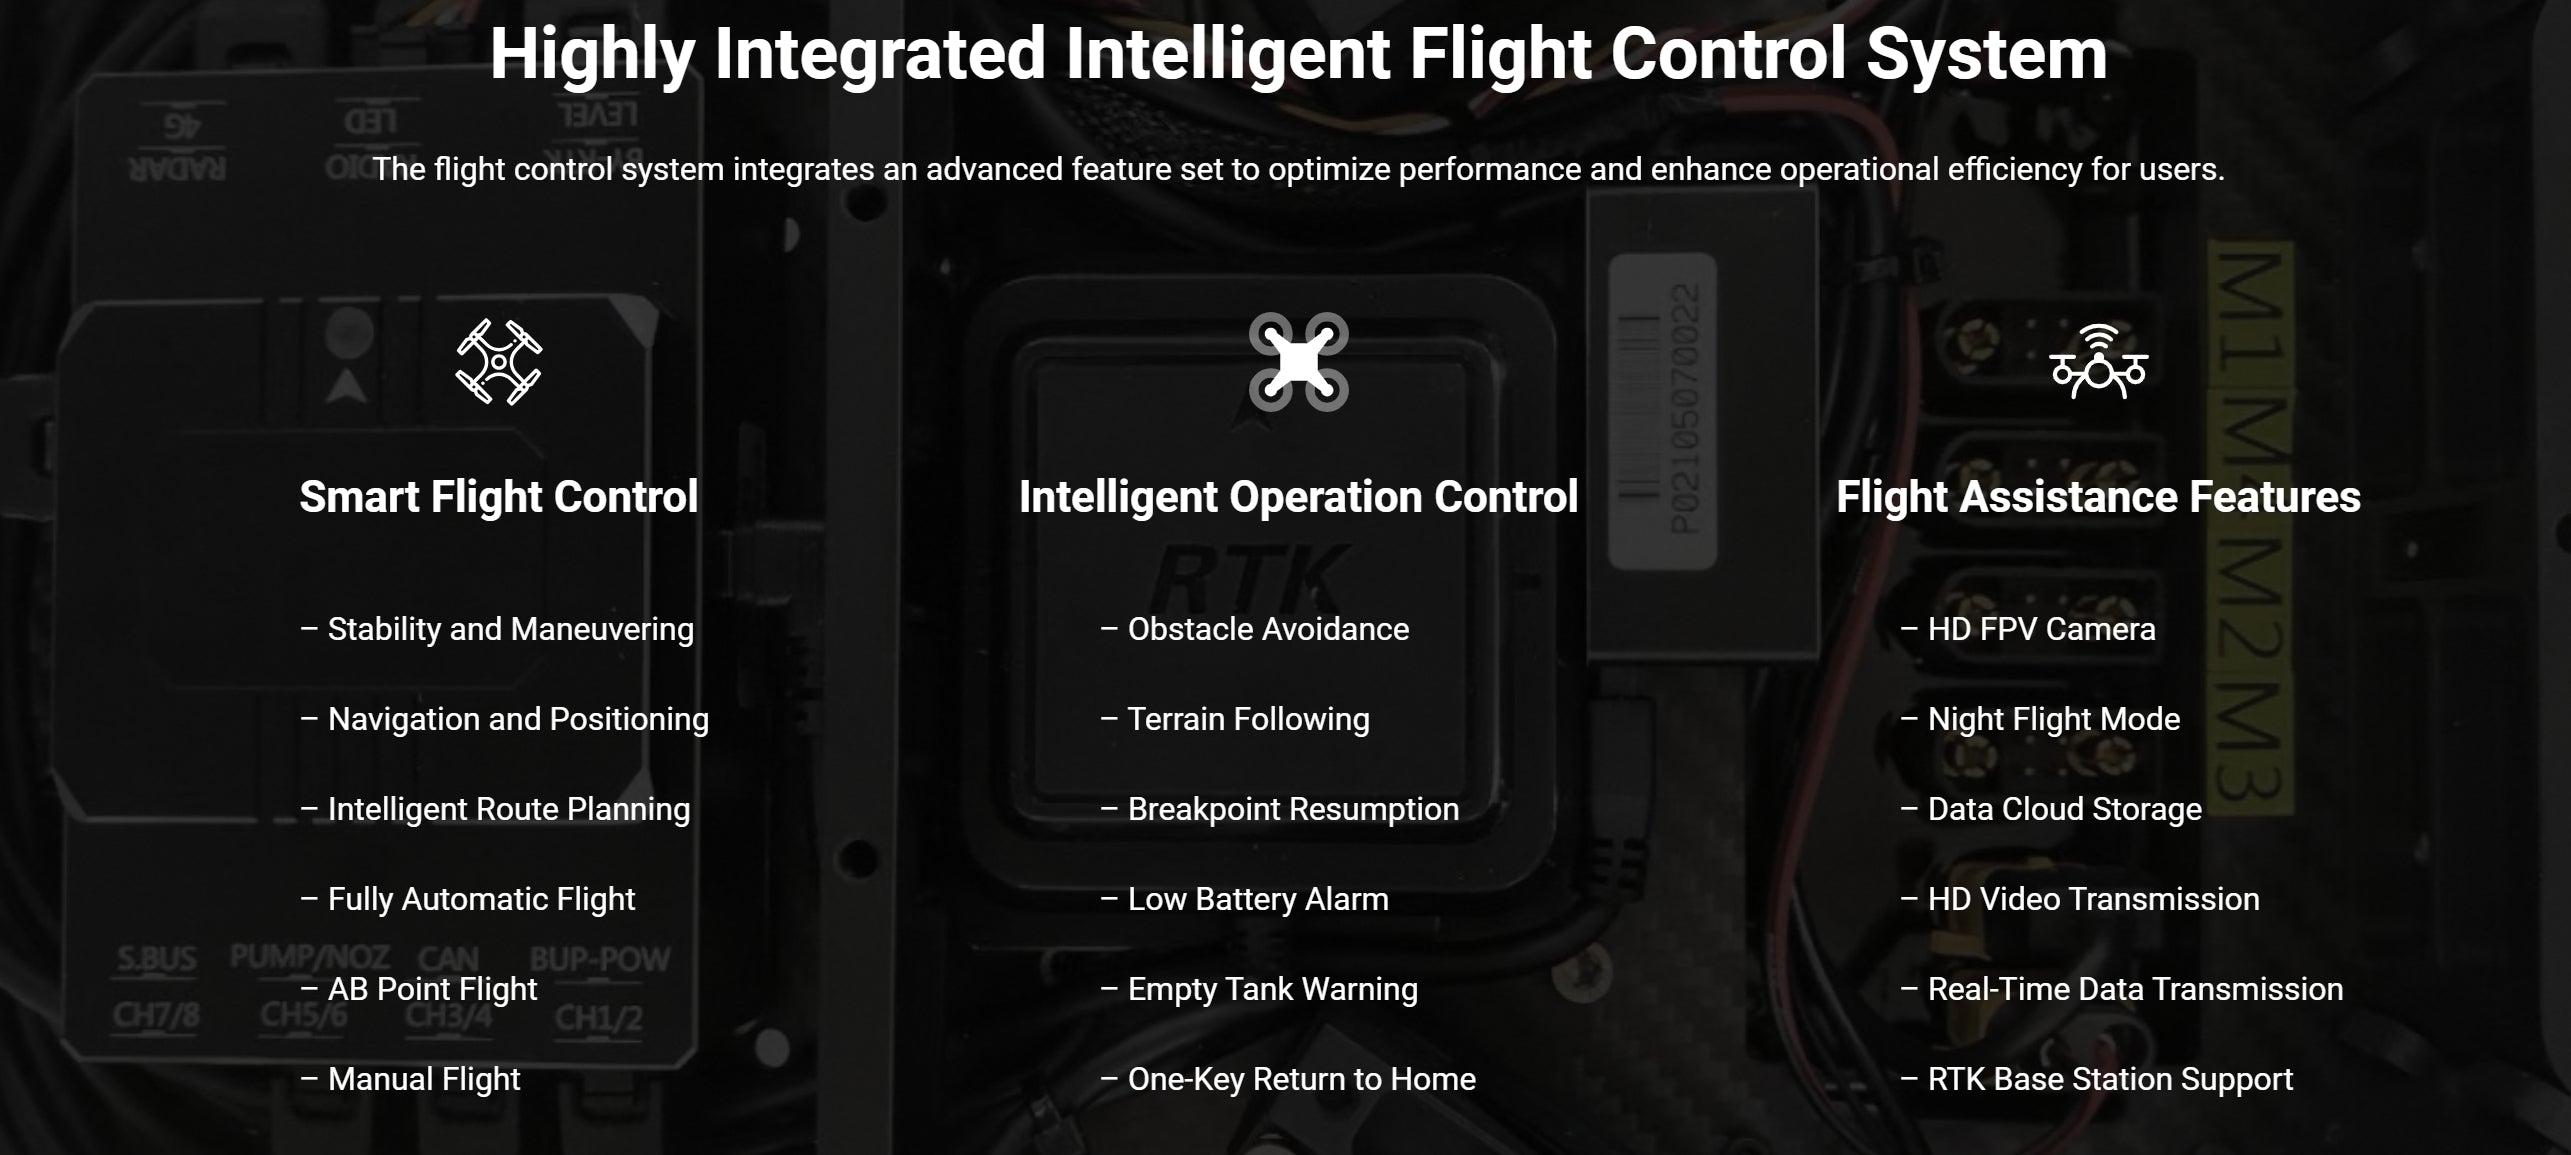 H160 Agricultural Drone, Intelligent Flight Control System E @ E CiJ OL The flight control system integrates an advanced